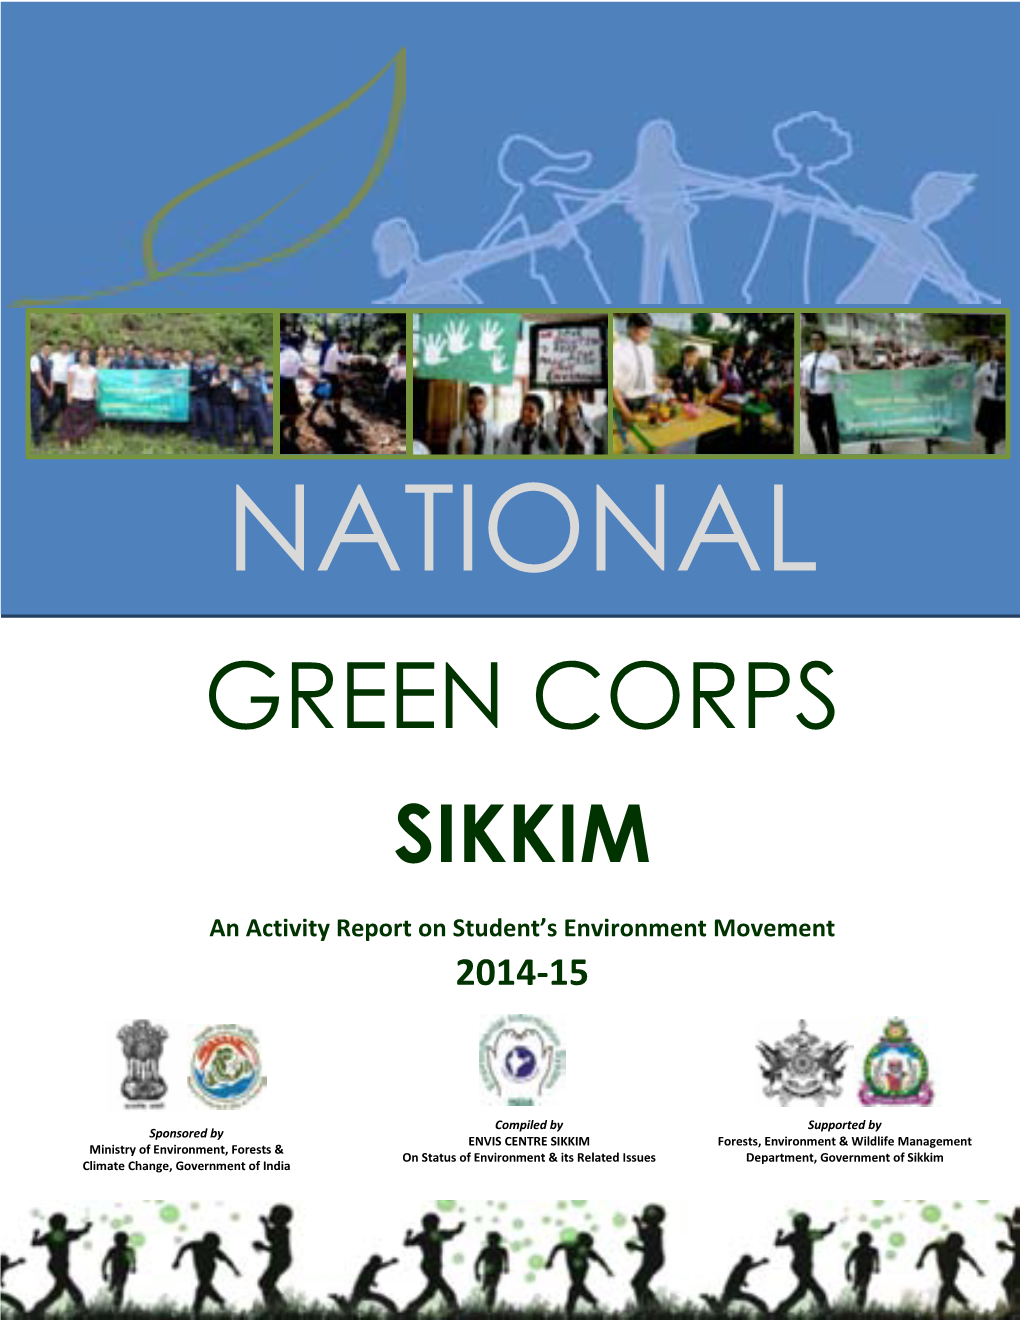 National Green Corps Sikkim